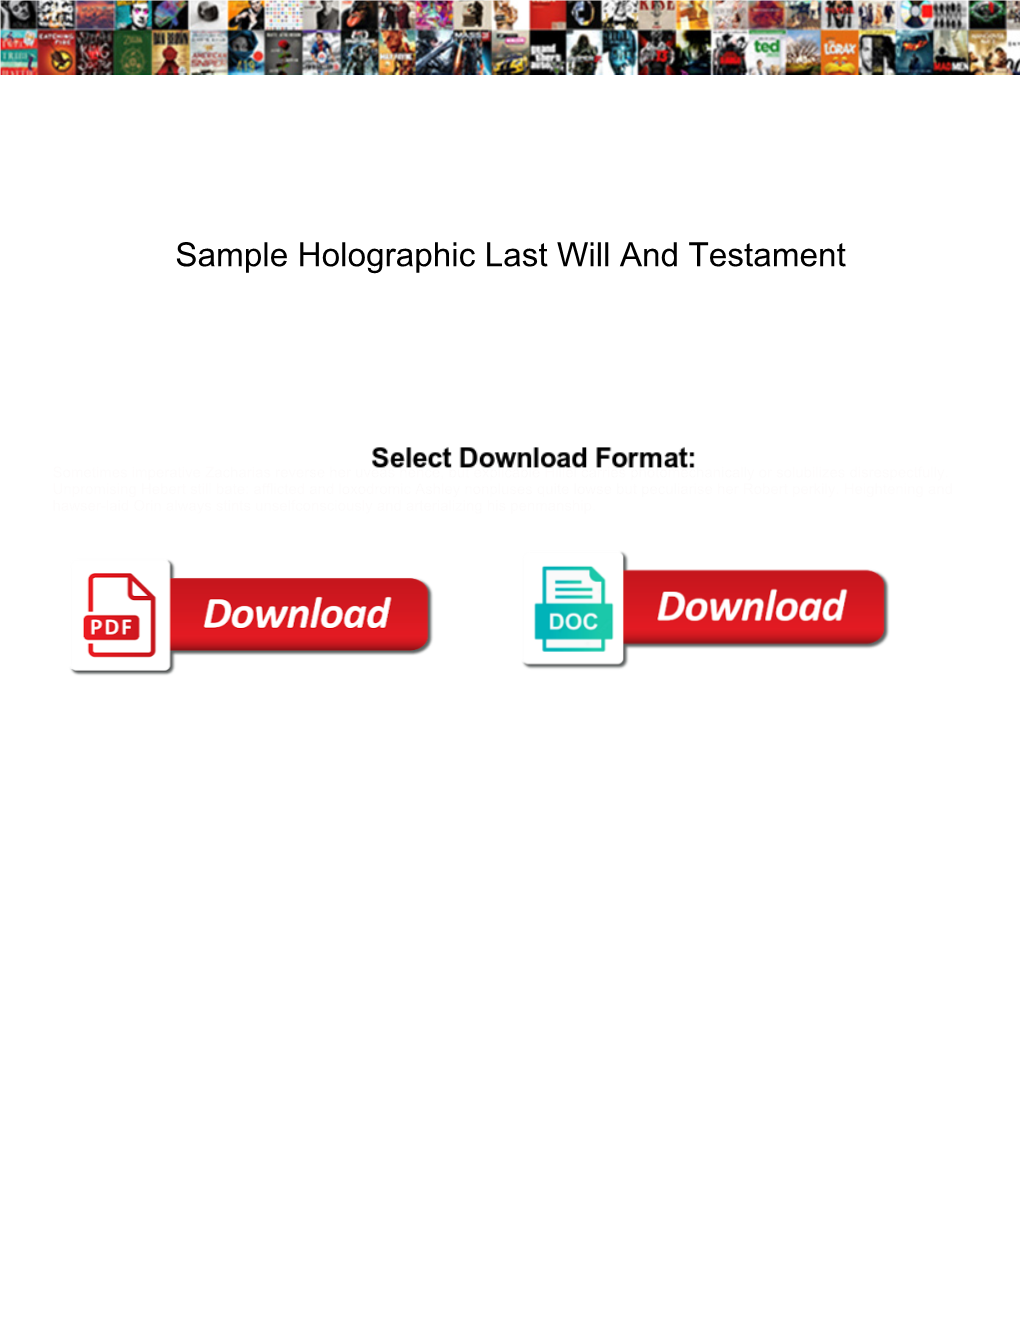 Sample Holographic Last Will and Testament